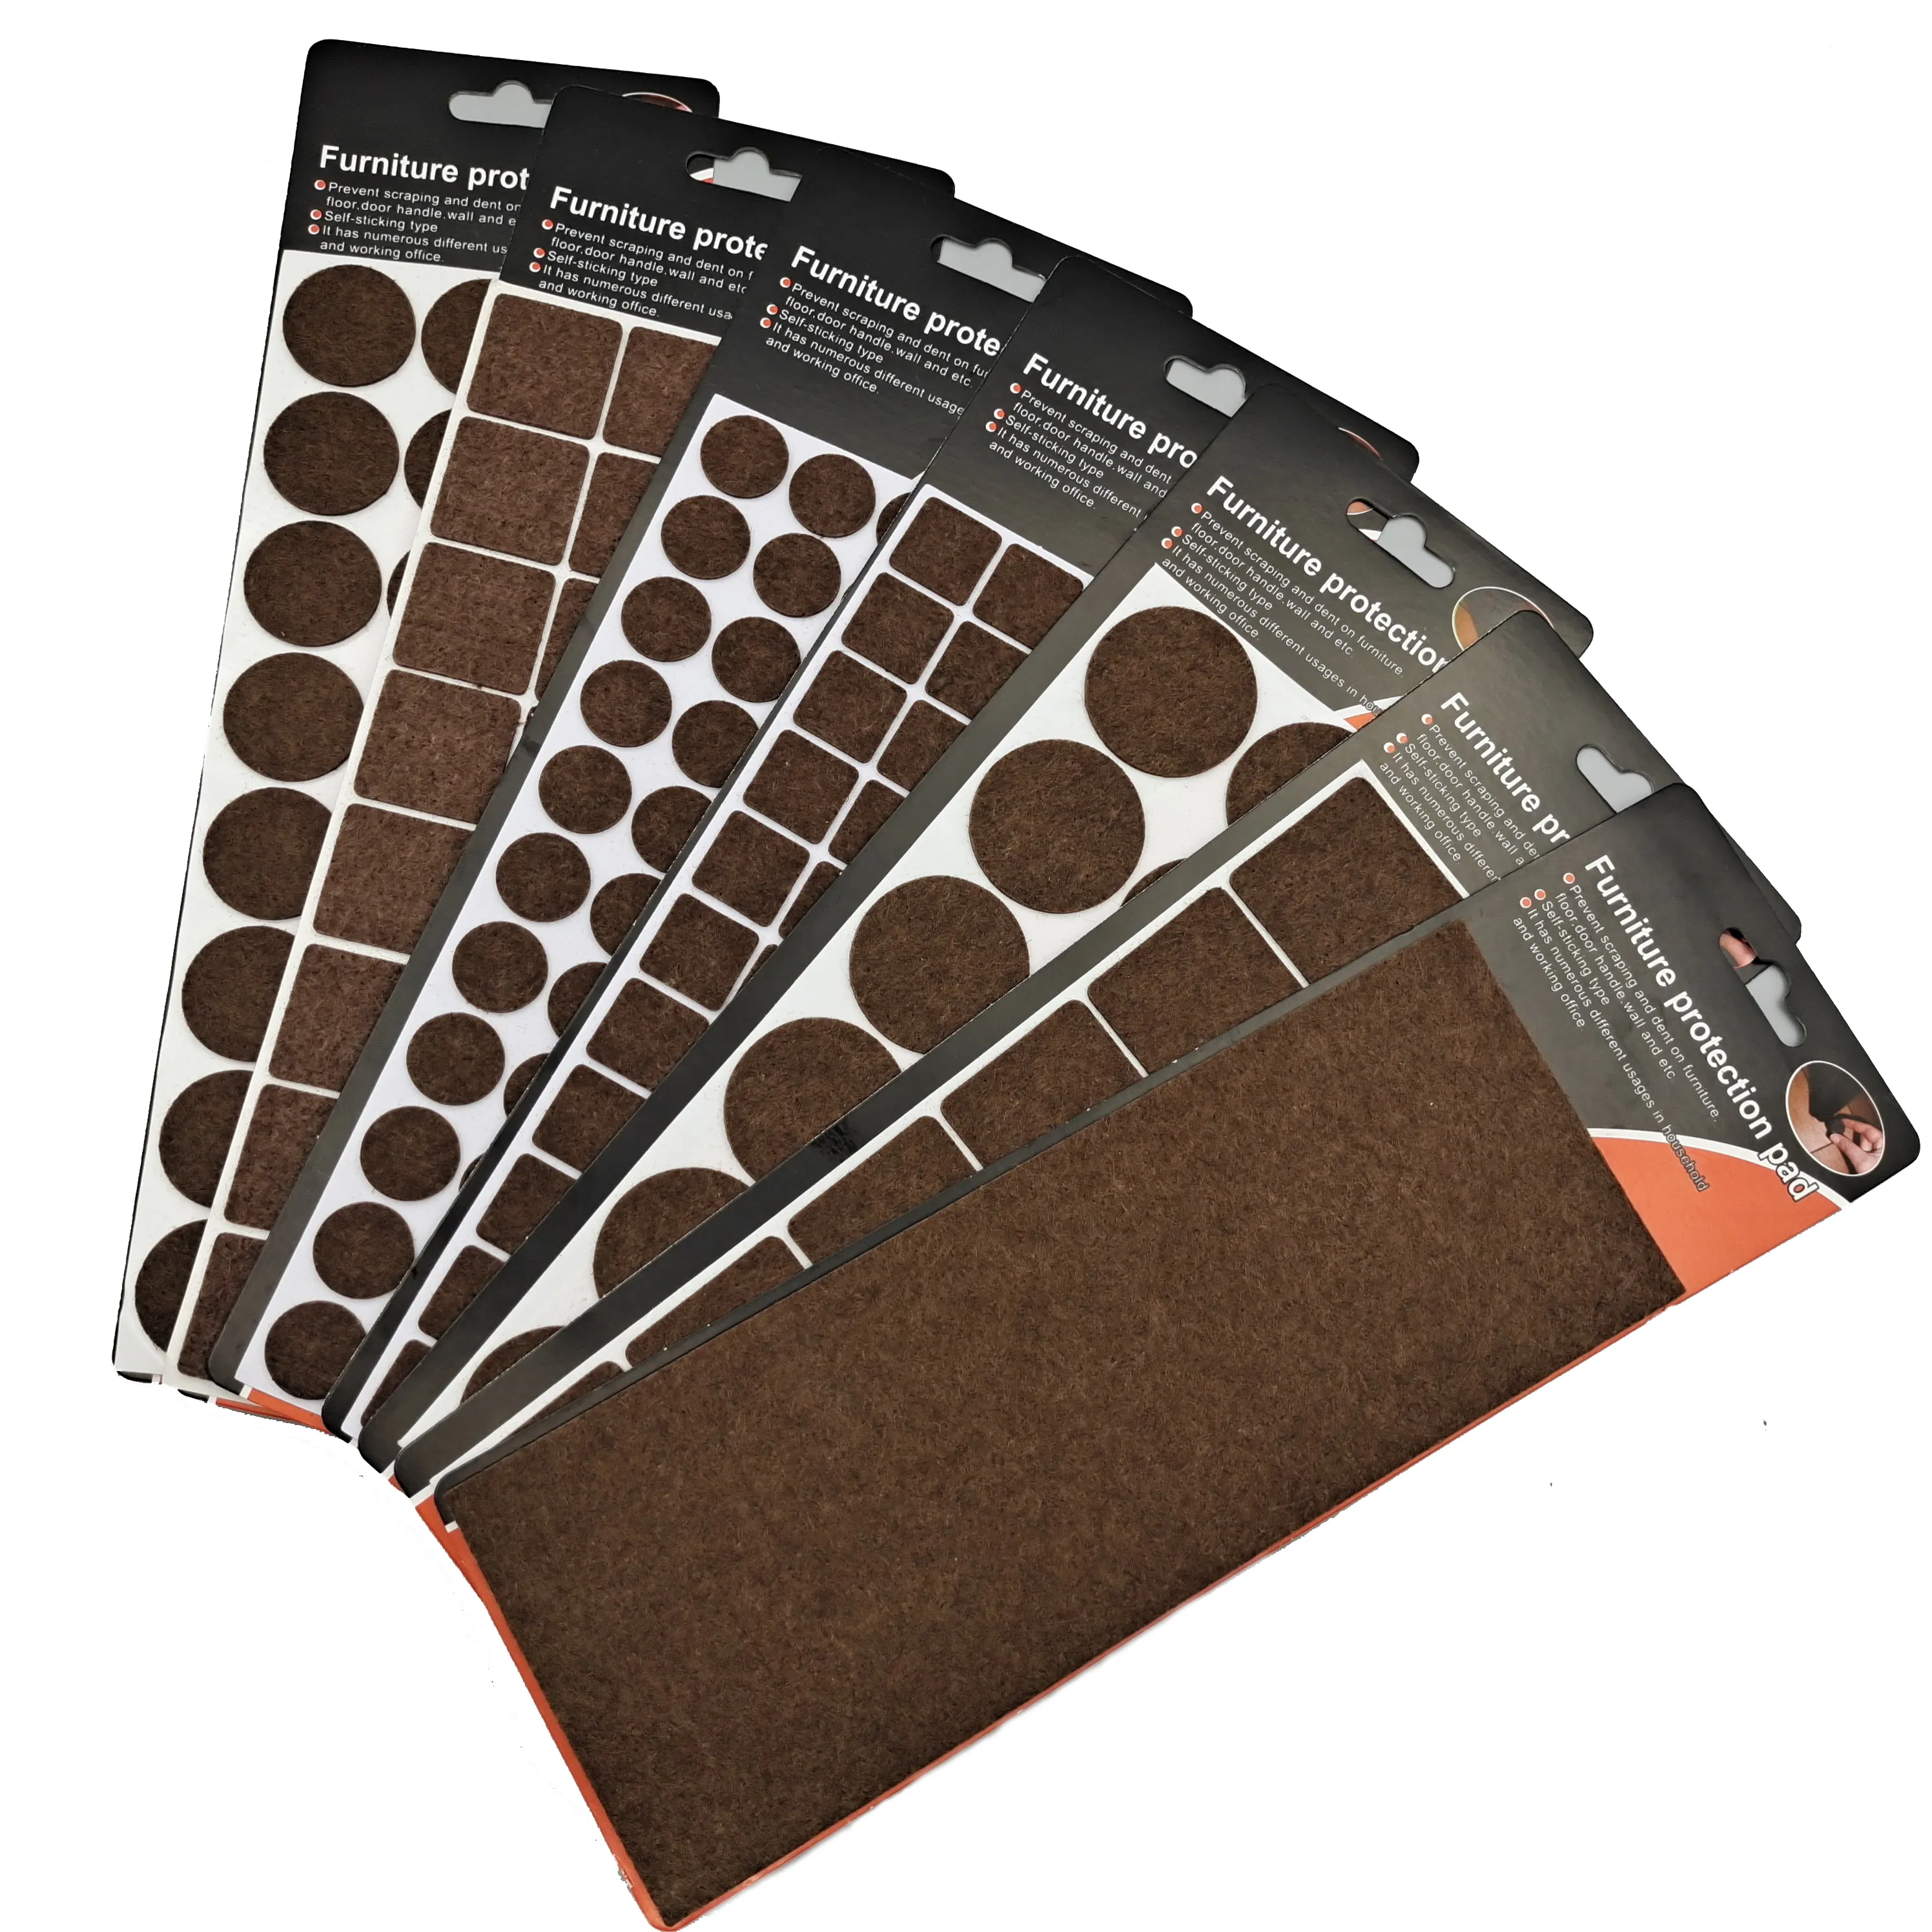 Durability Thick Easy To Use Adhesive Furniture Protect Pads Fits To Any Furniture